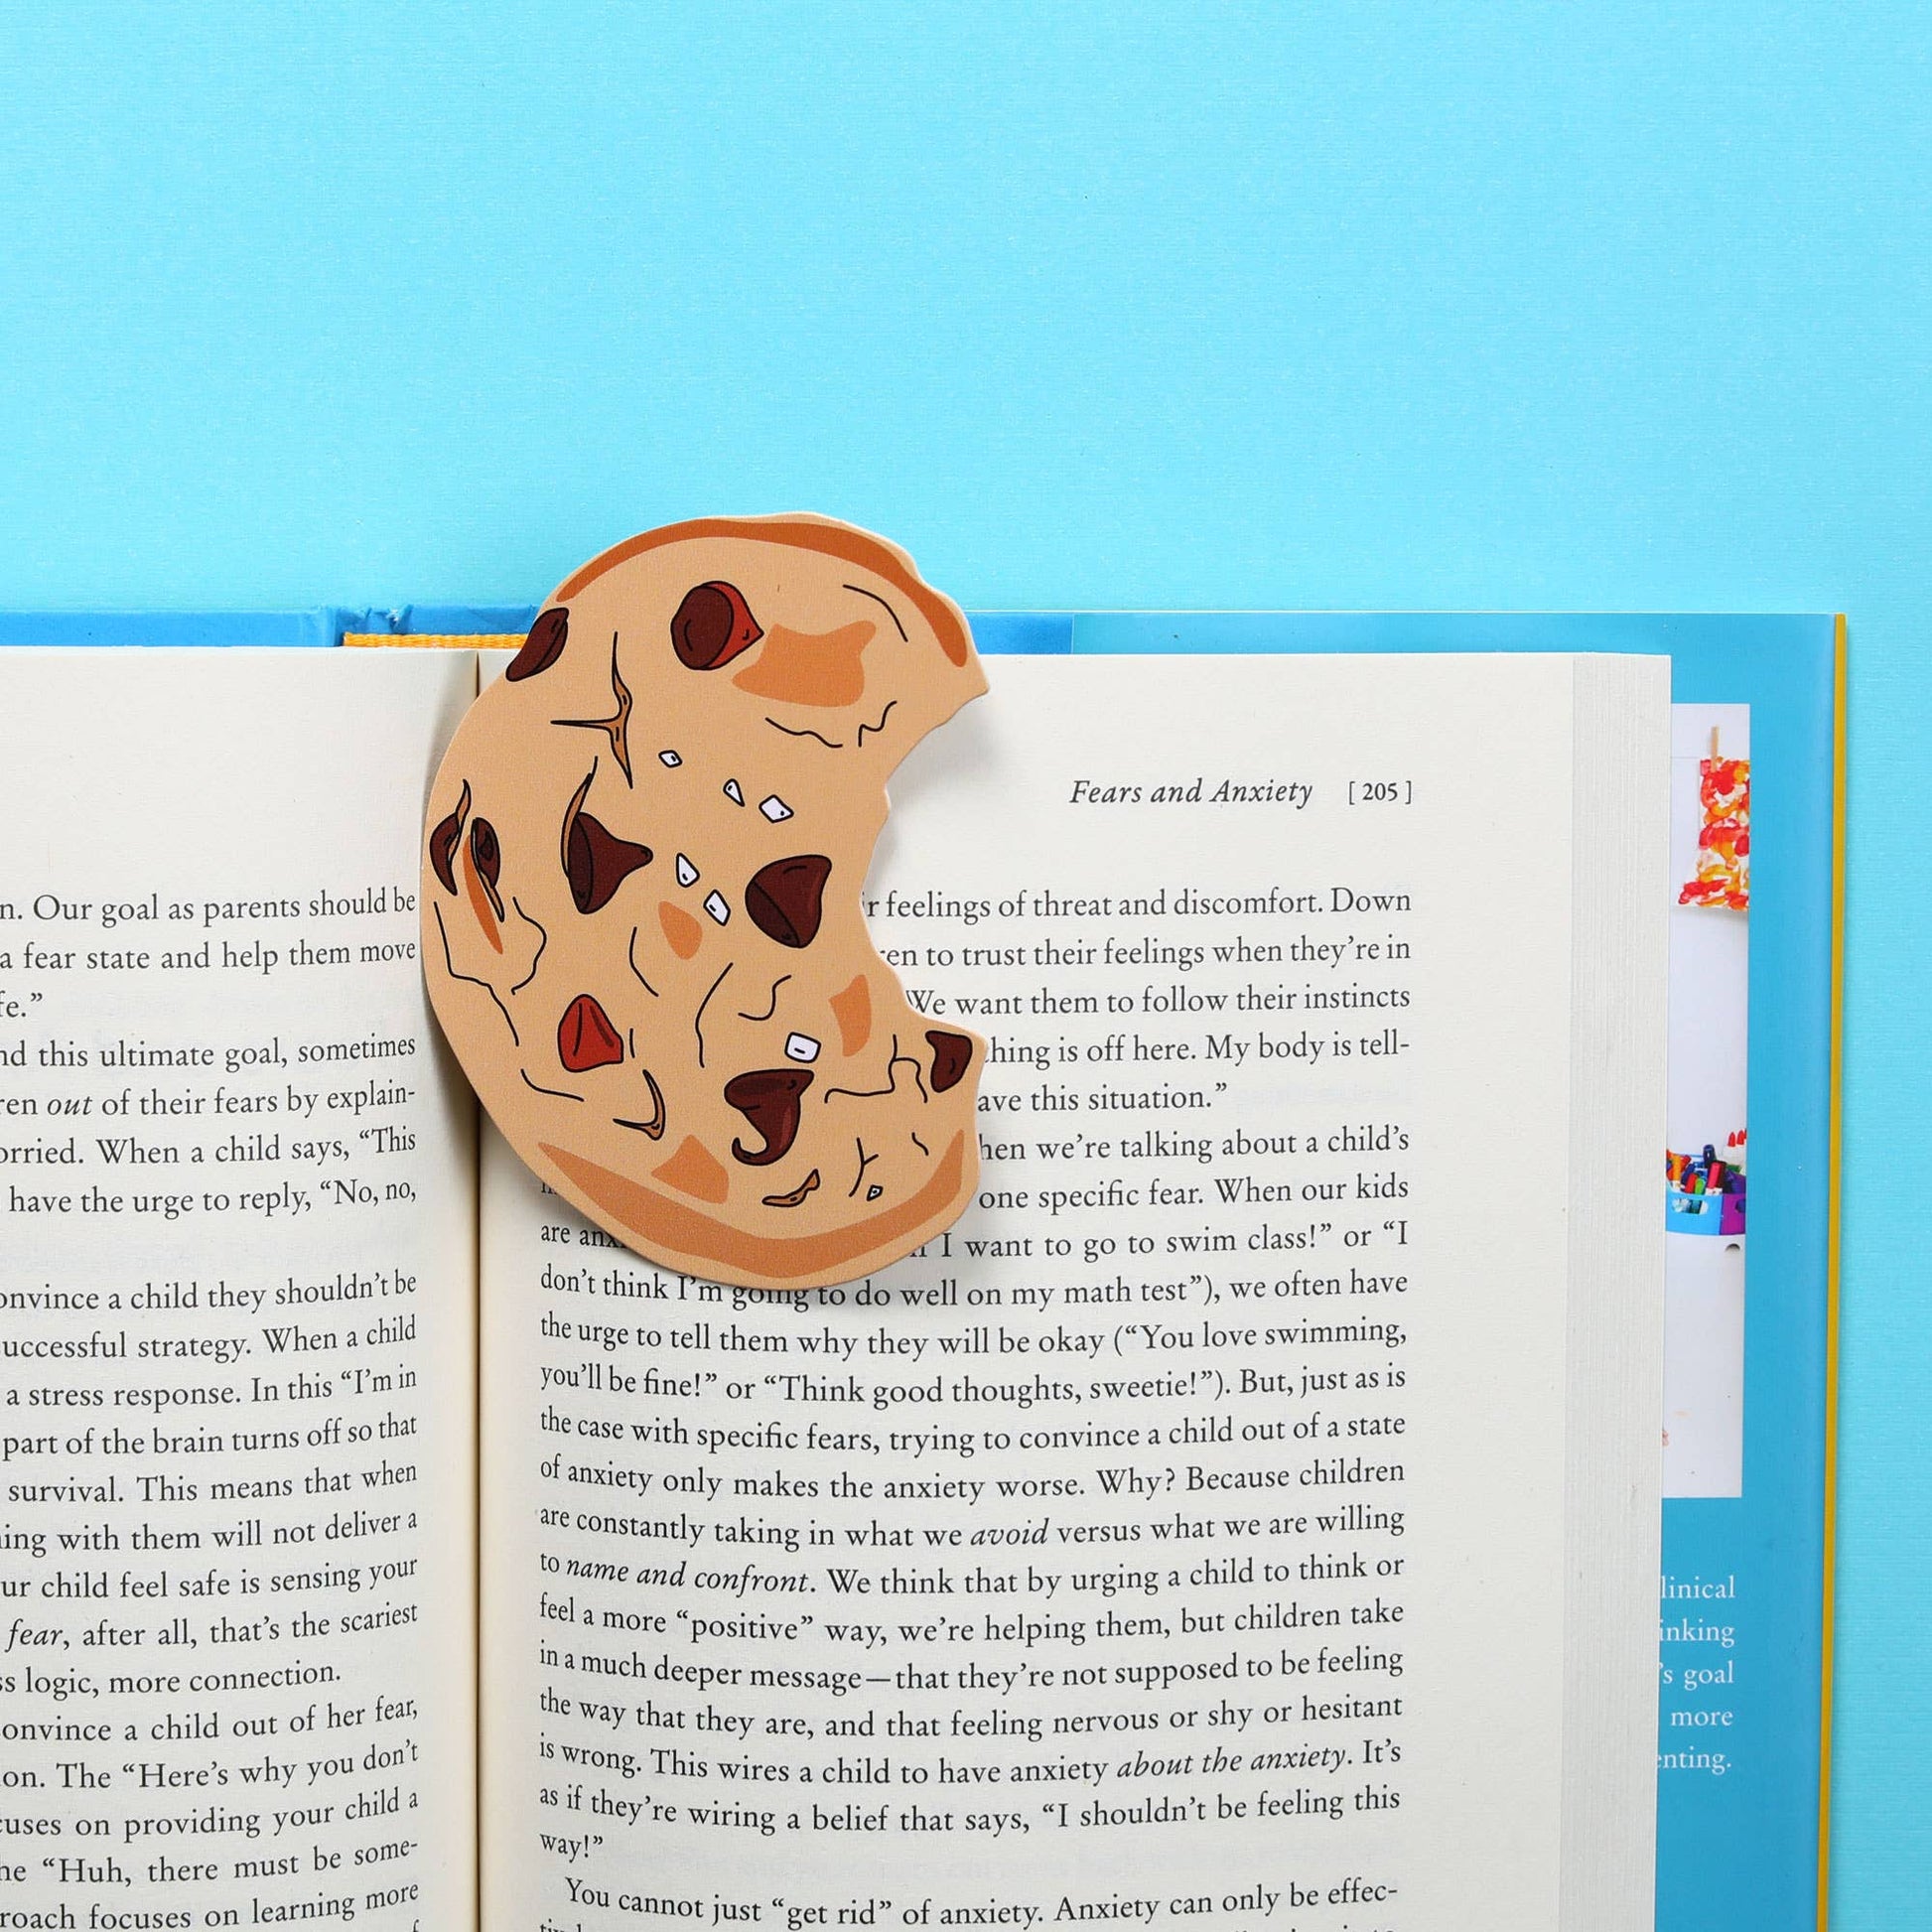 Bookmark made to look like a bitten chocolate chip cookie. 